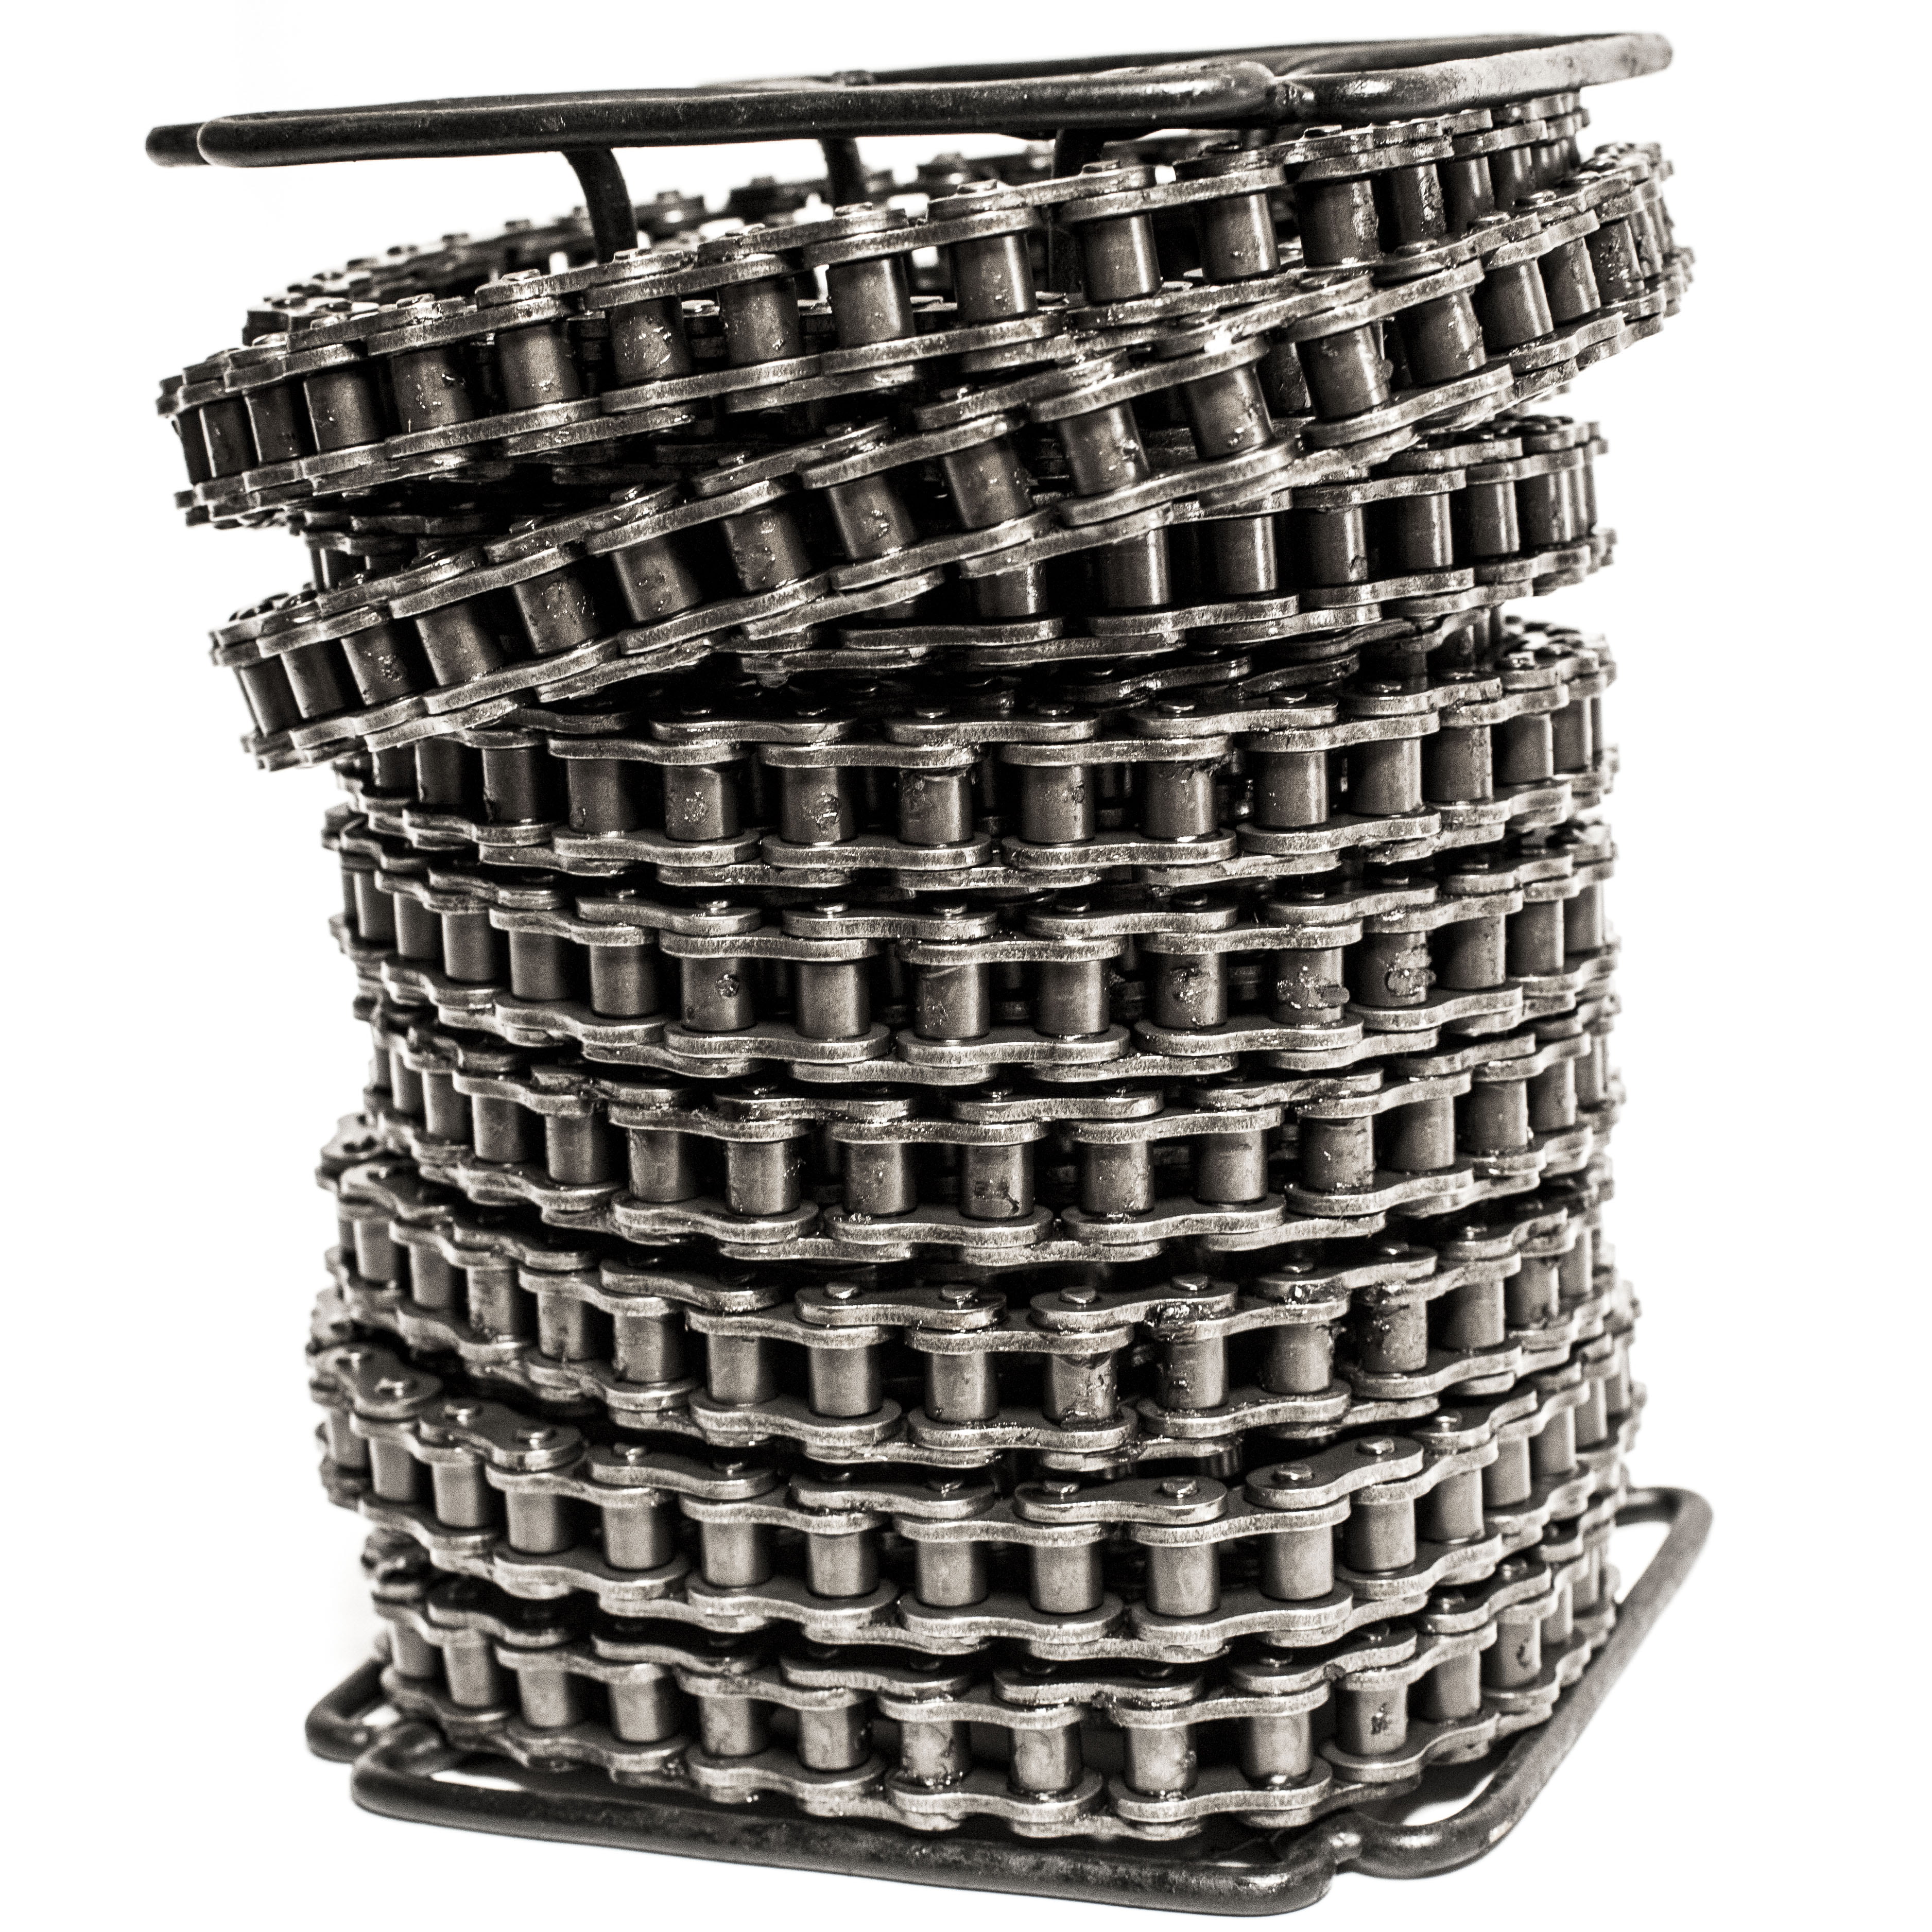 50 Roller Chain 50 Feet with 5 Connecting Links